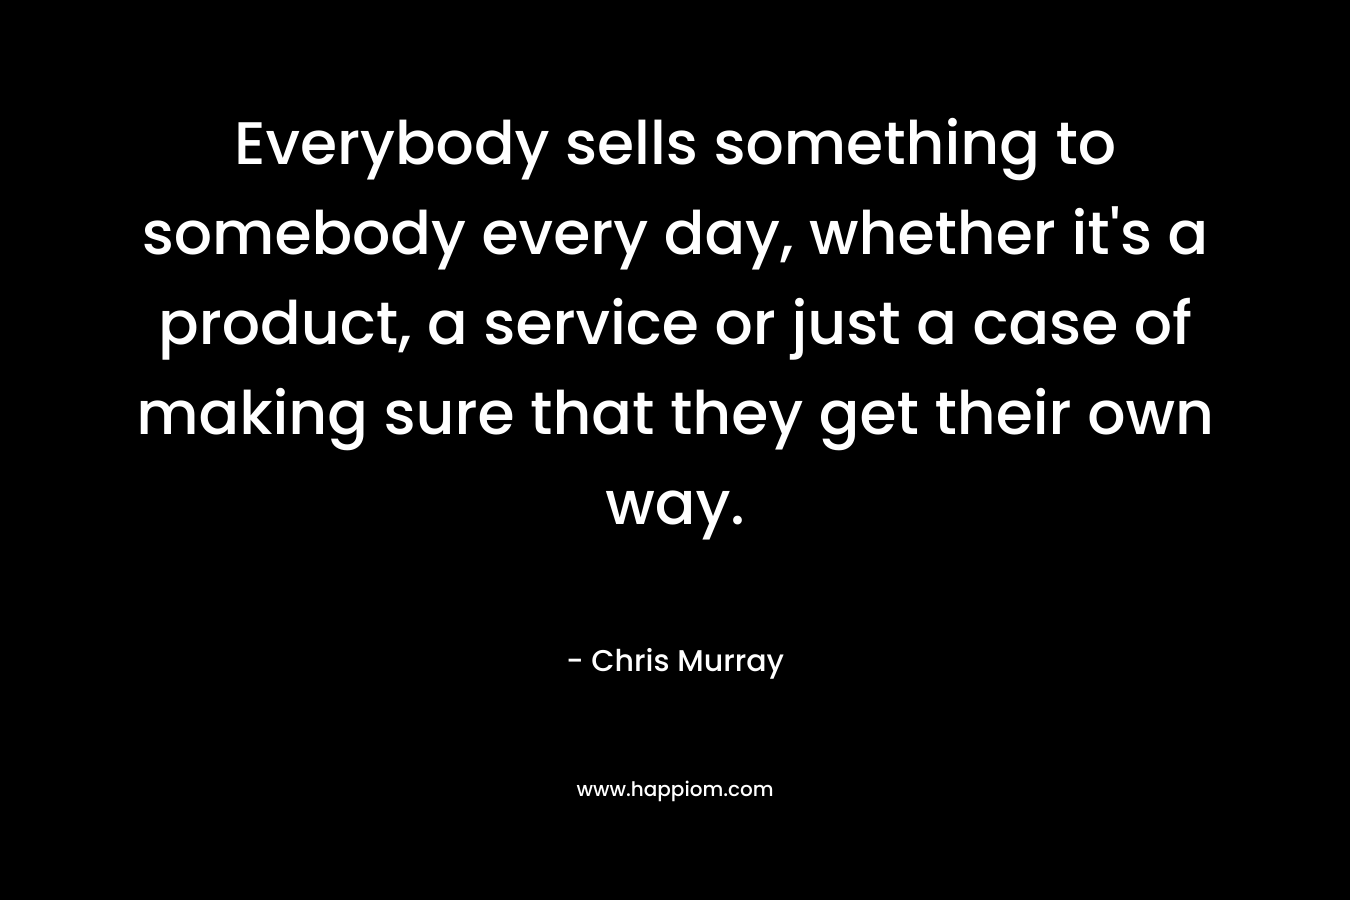 Everybody sells something to somebody every day, whether it's a product, a service or just a case of making sure that they get their own way.